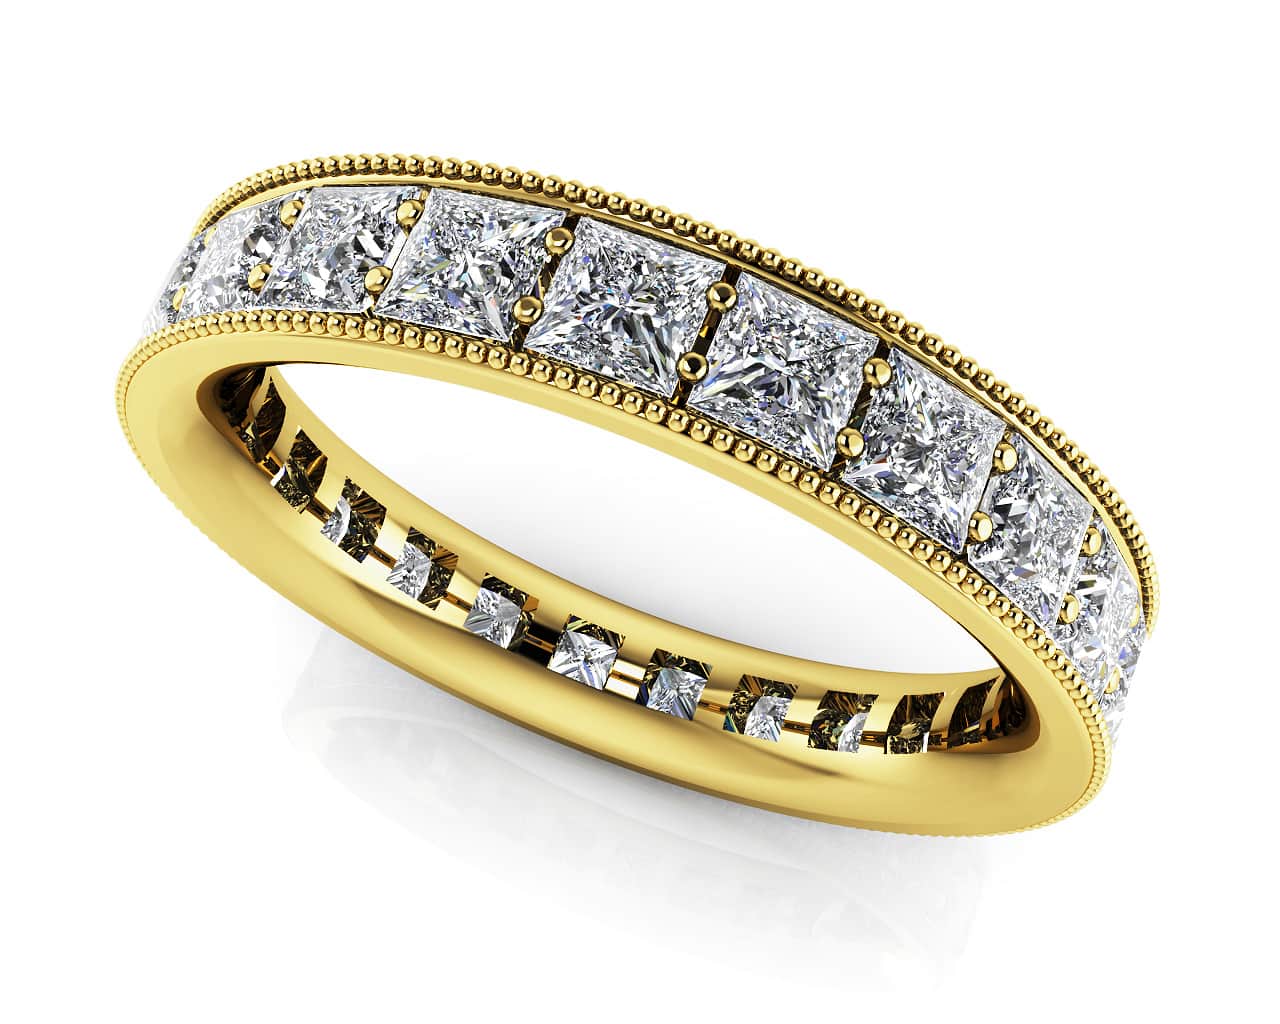 Vintage Princess Cut Diamond Eternity Ring In Yellow White Gold Or Platinum